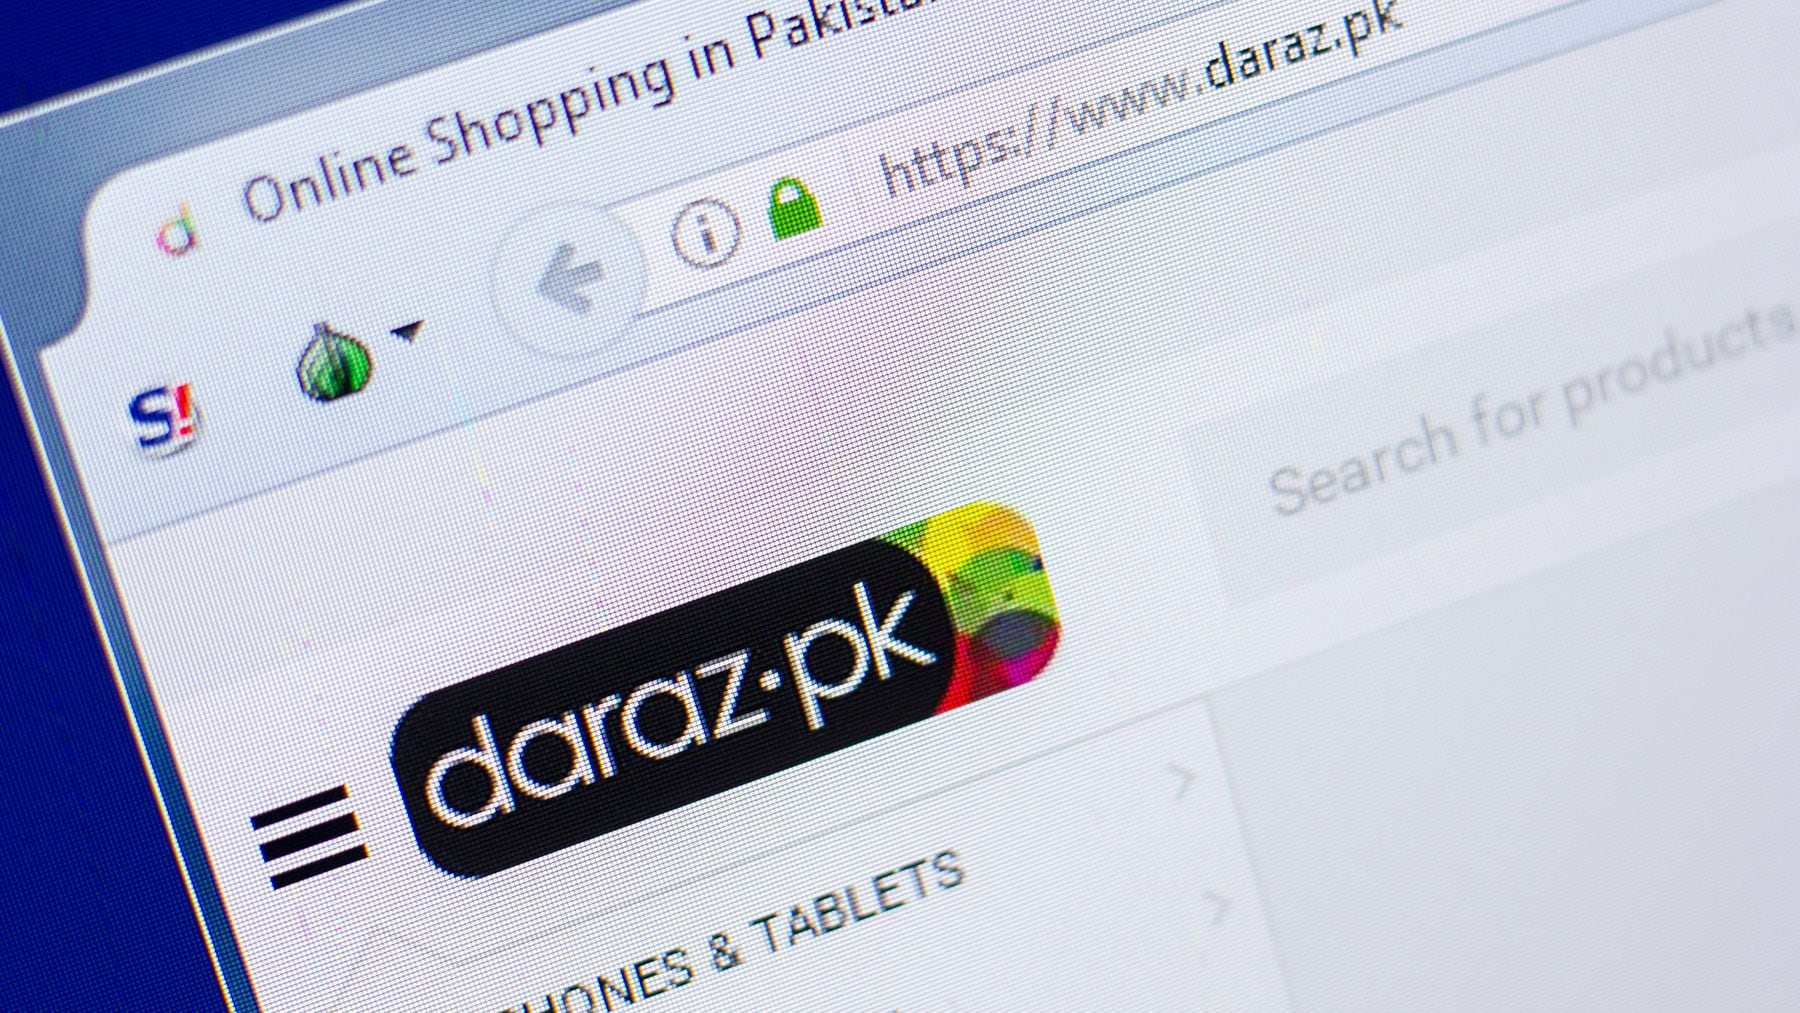 Alibaba-Owned Daraz Gears Up for Battle Against Amazon